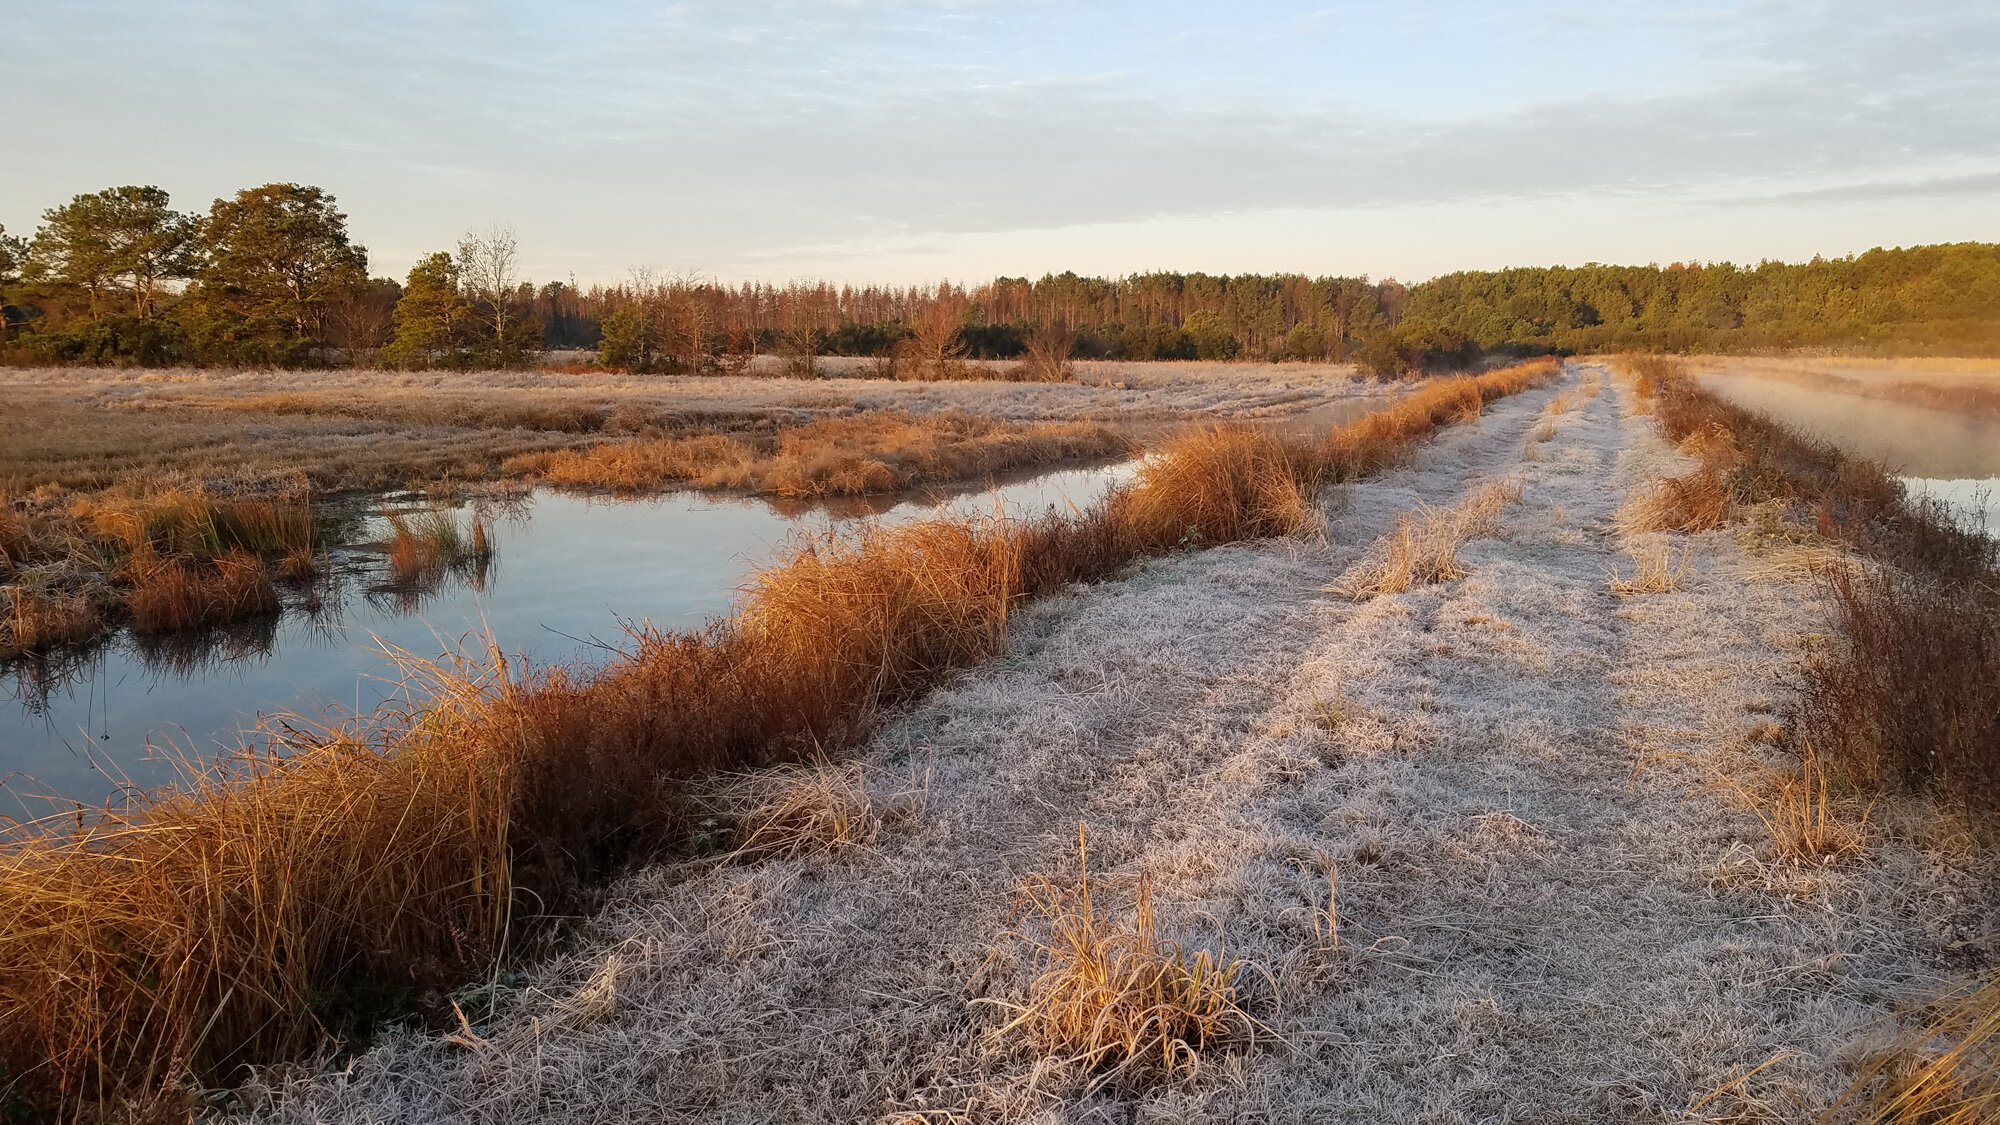  Morning Frost at Princess Anne WMA Whitehurst Tract / 10 Nov 